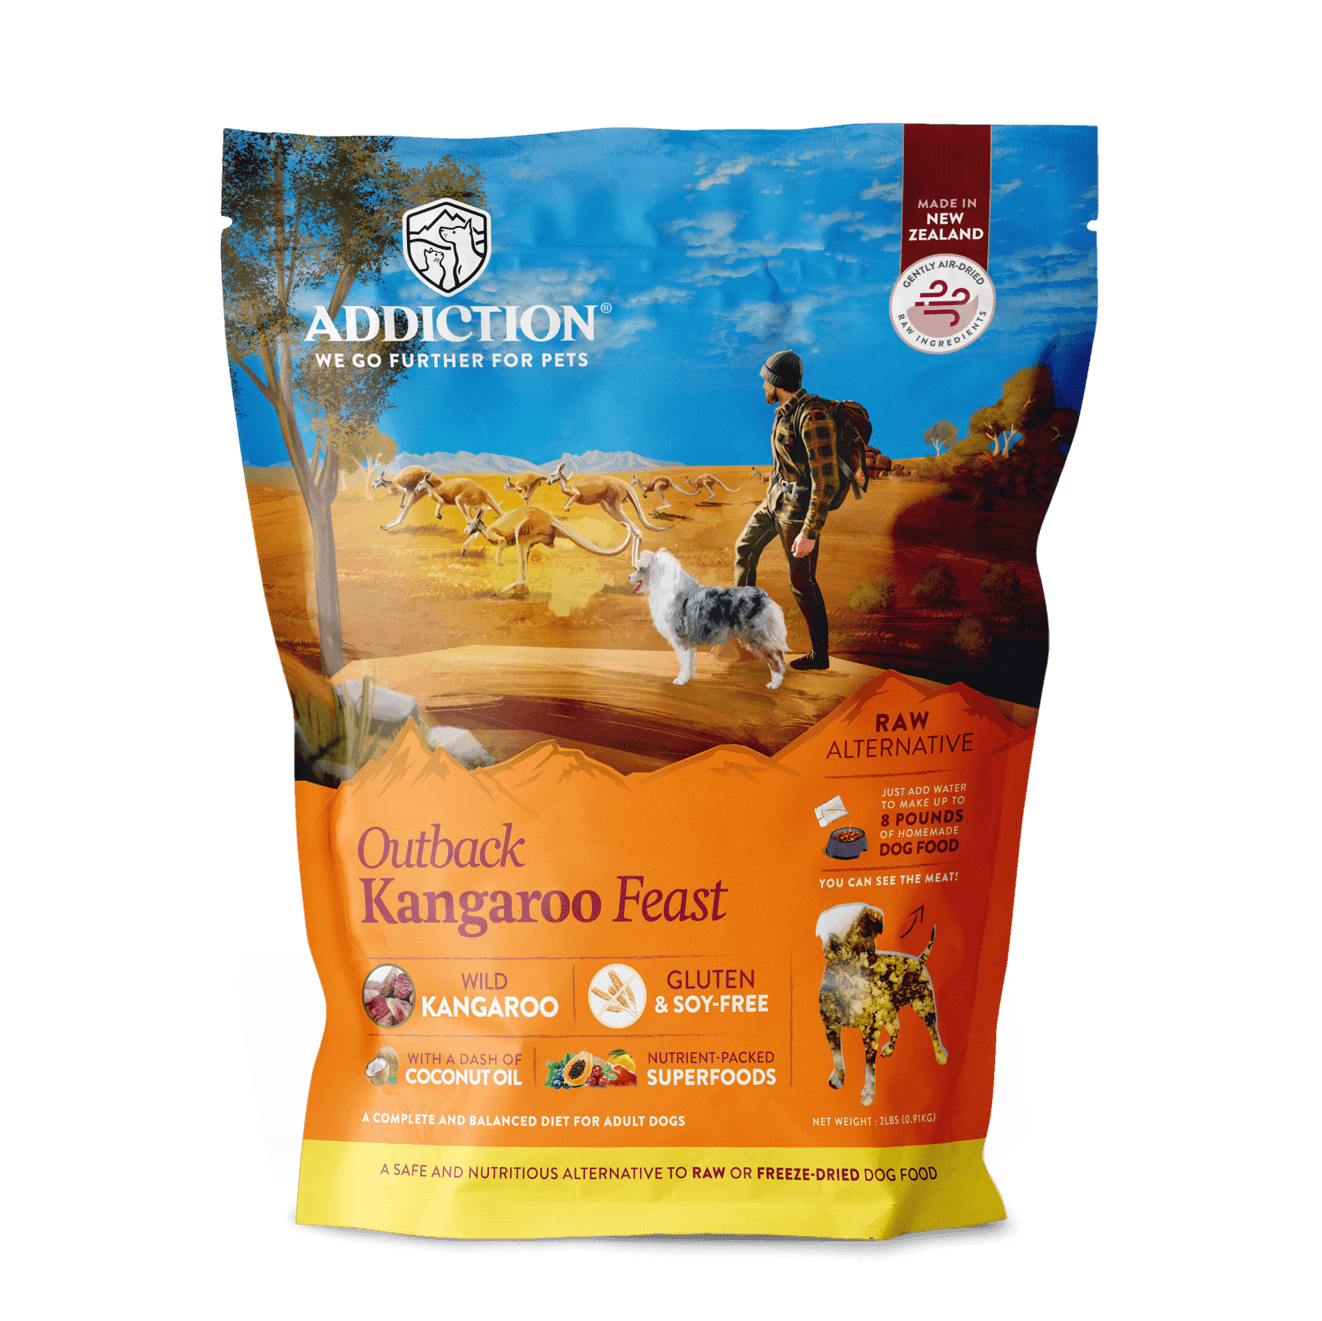 Addiction Dog Food Review (Dehydrated)